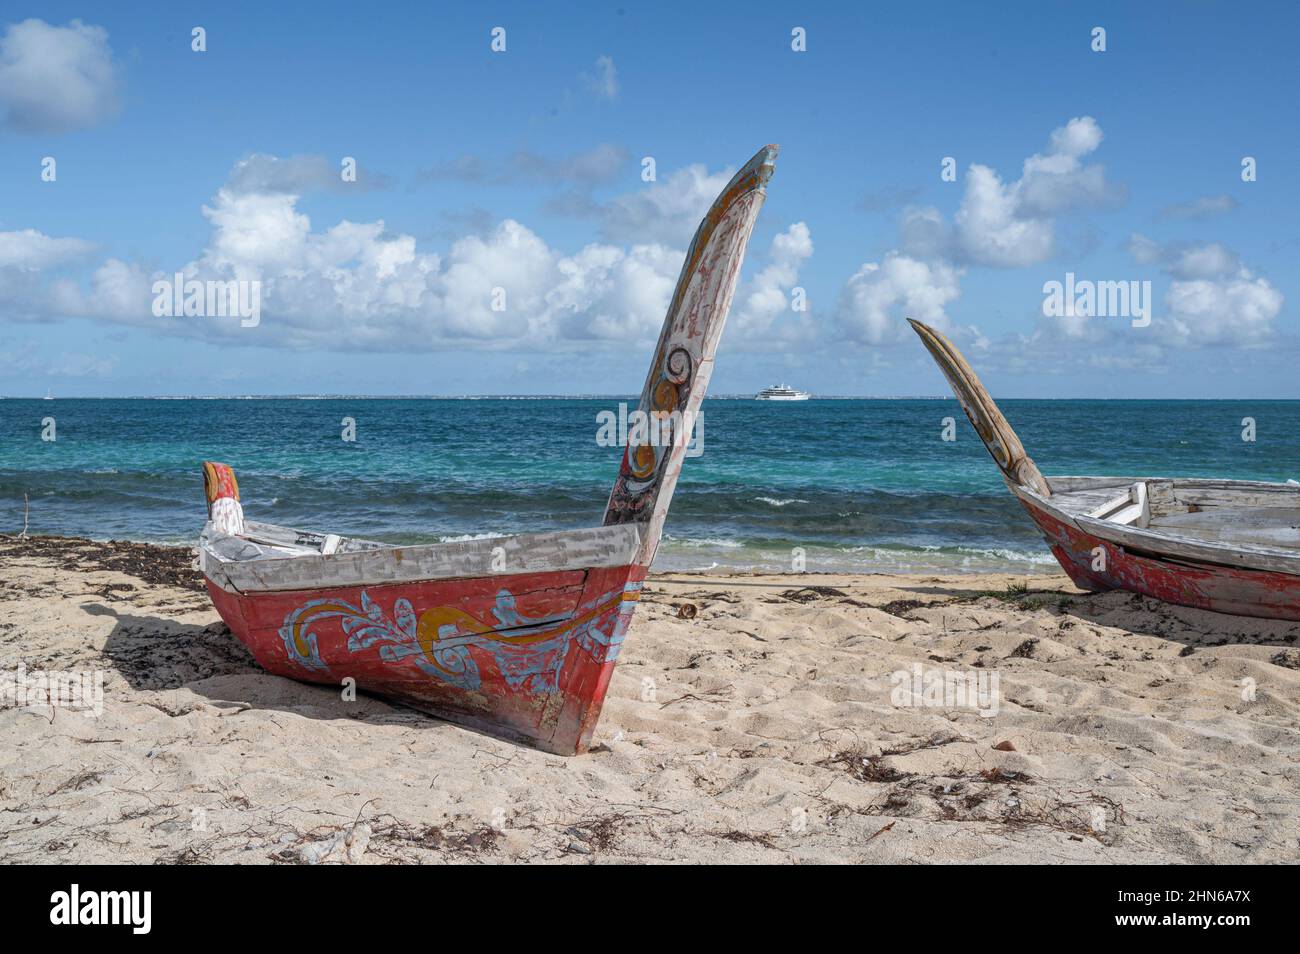 Traditional wooden boats, seen on the beach of Nettle Bay / Baie Nettlé on the French side of the island Saint-Martin / Sint Maarten Stock Photo